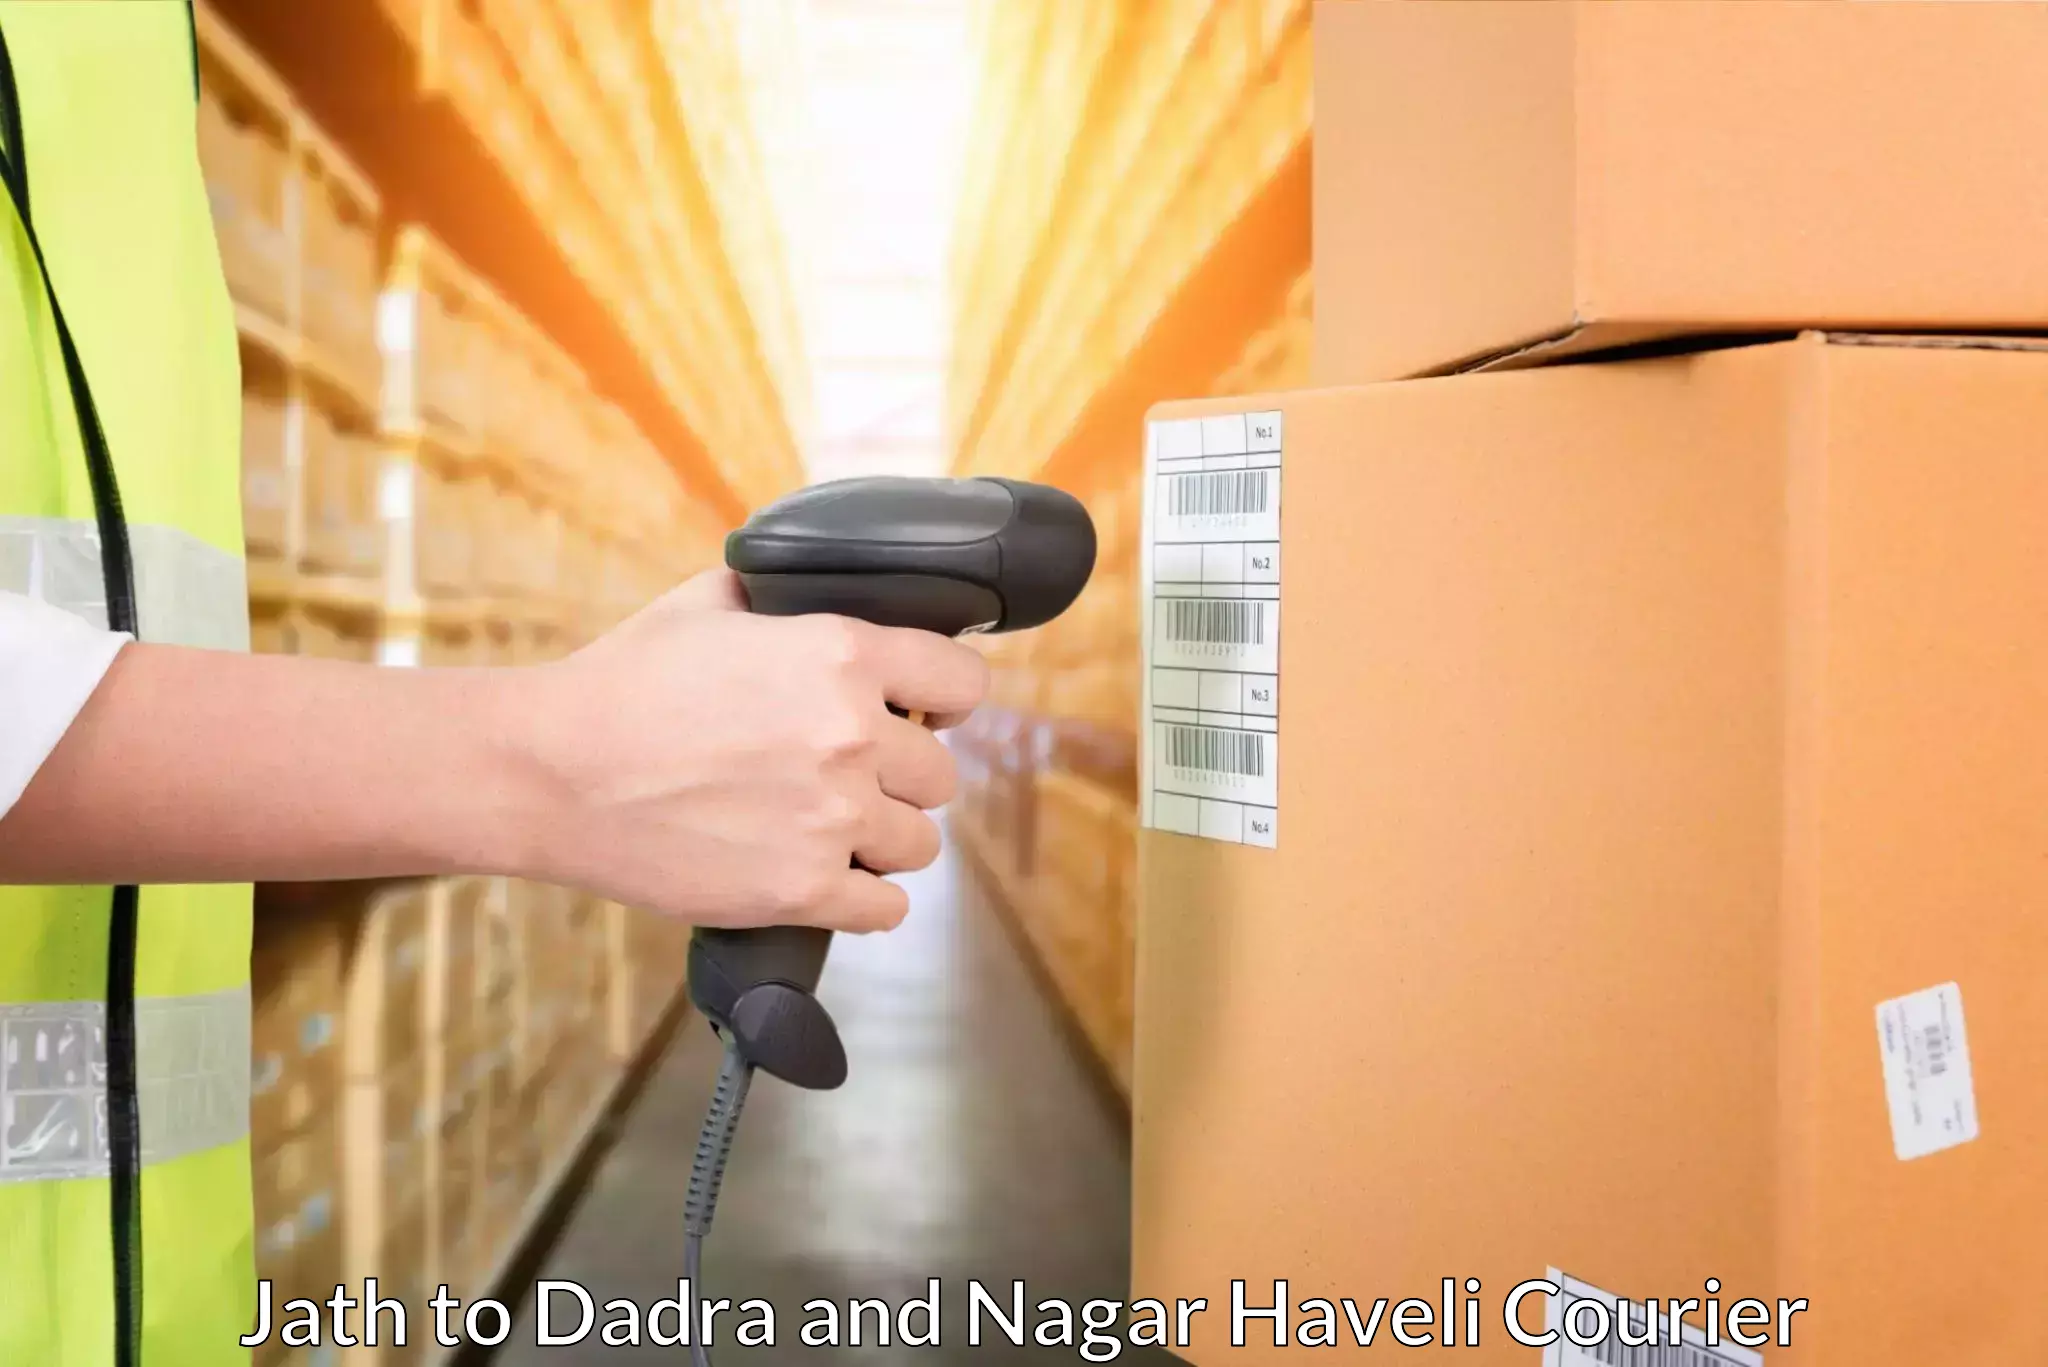 Courier dispatch services Jath to Dadra and Nagar Haveli